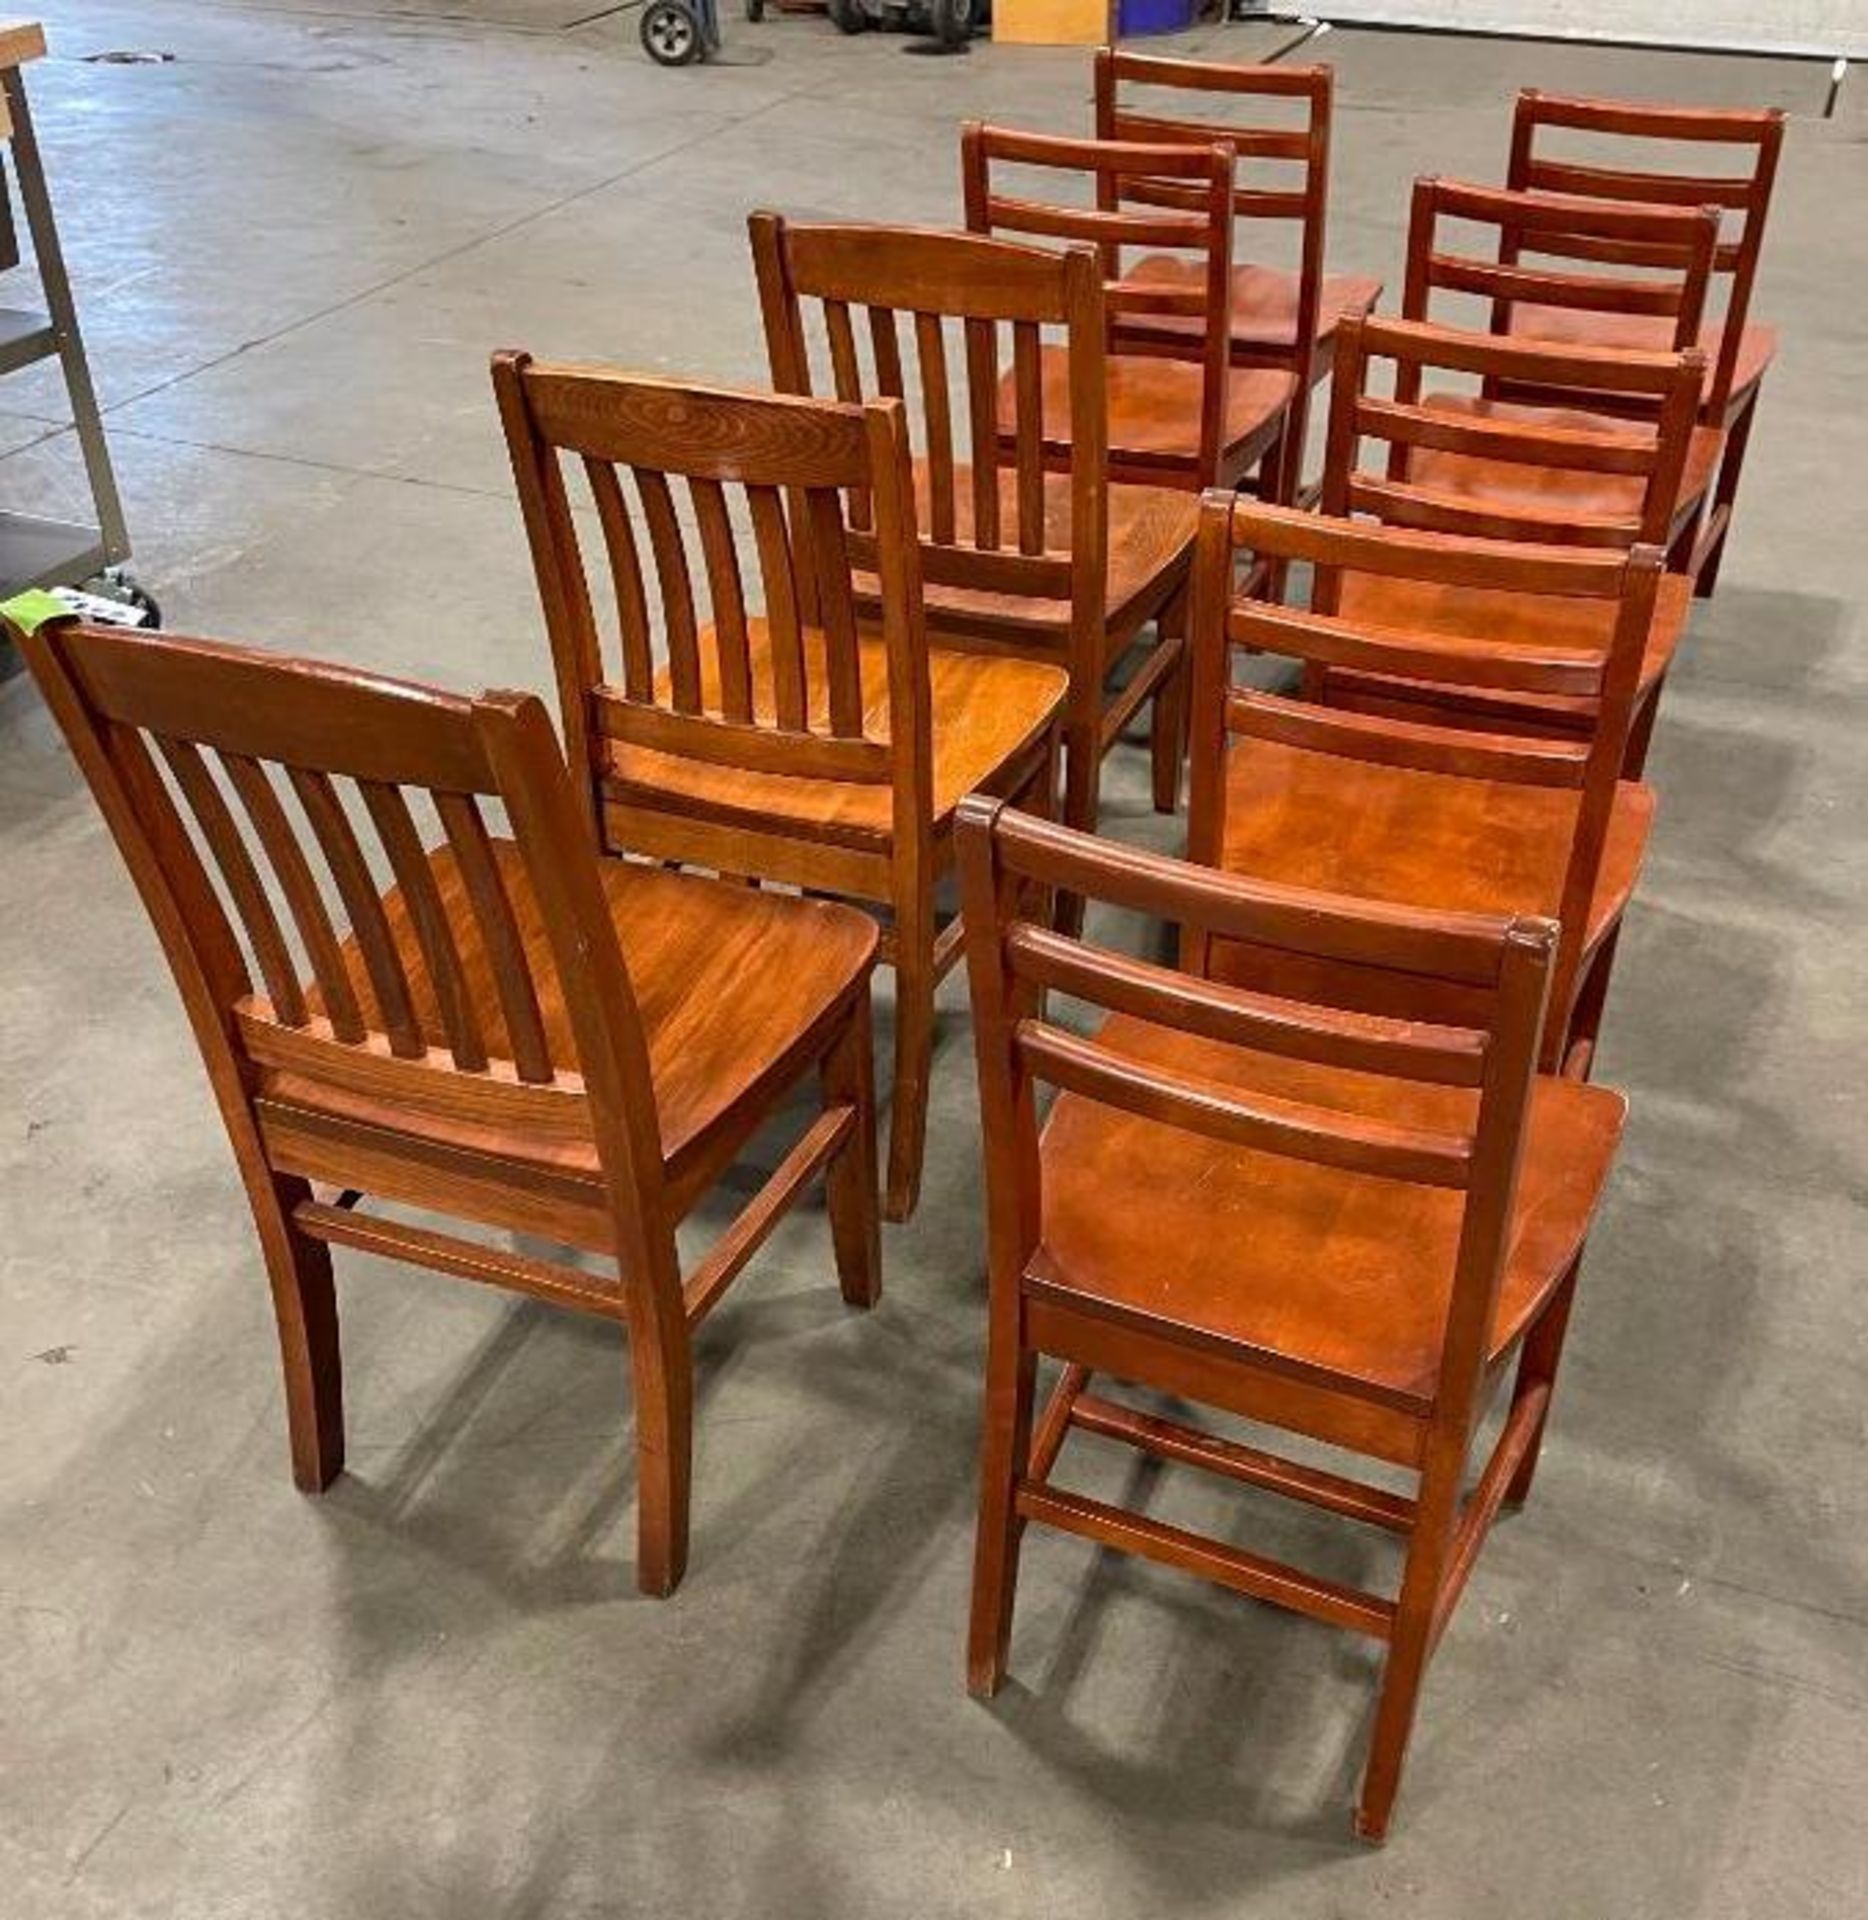 LOT OF (10) DOR-VAL SLAT BACK WOOD DINING CHAIRS - Image 8 of 10